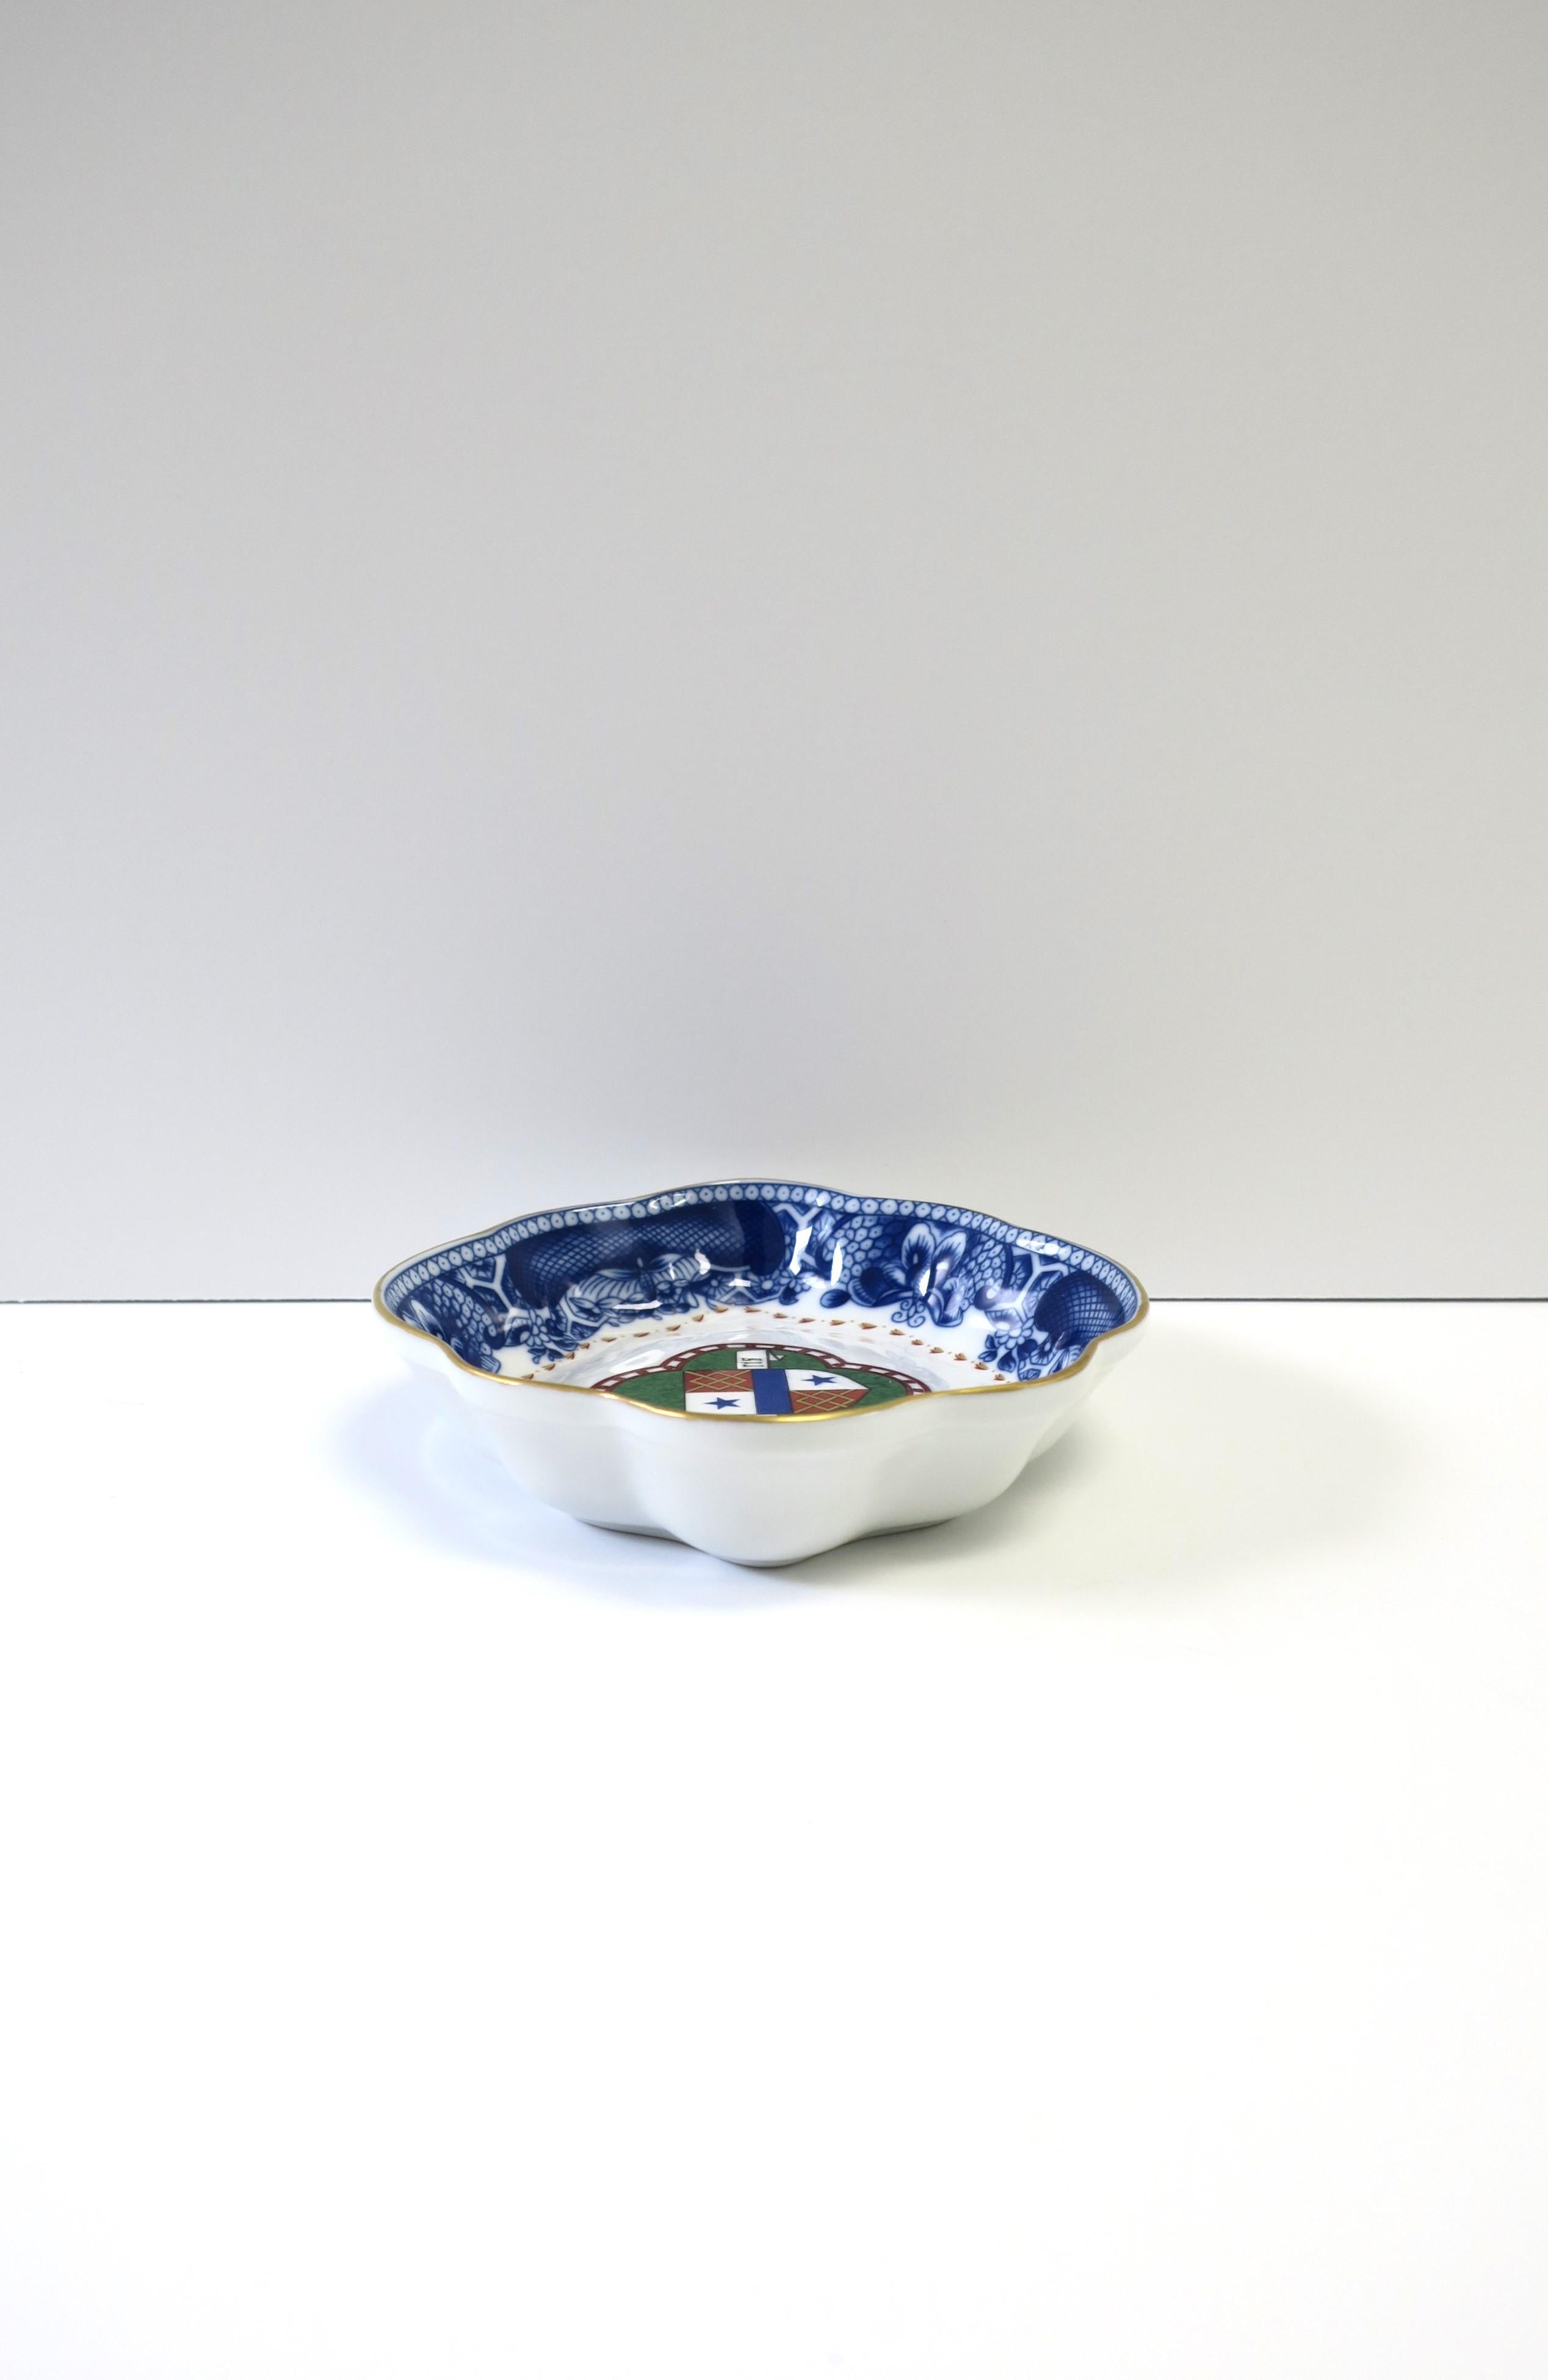 Blue and White Porcelain Jewelry Dish by Mottahedeh In Excellent Condition For Sale In New York, NY